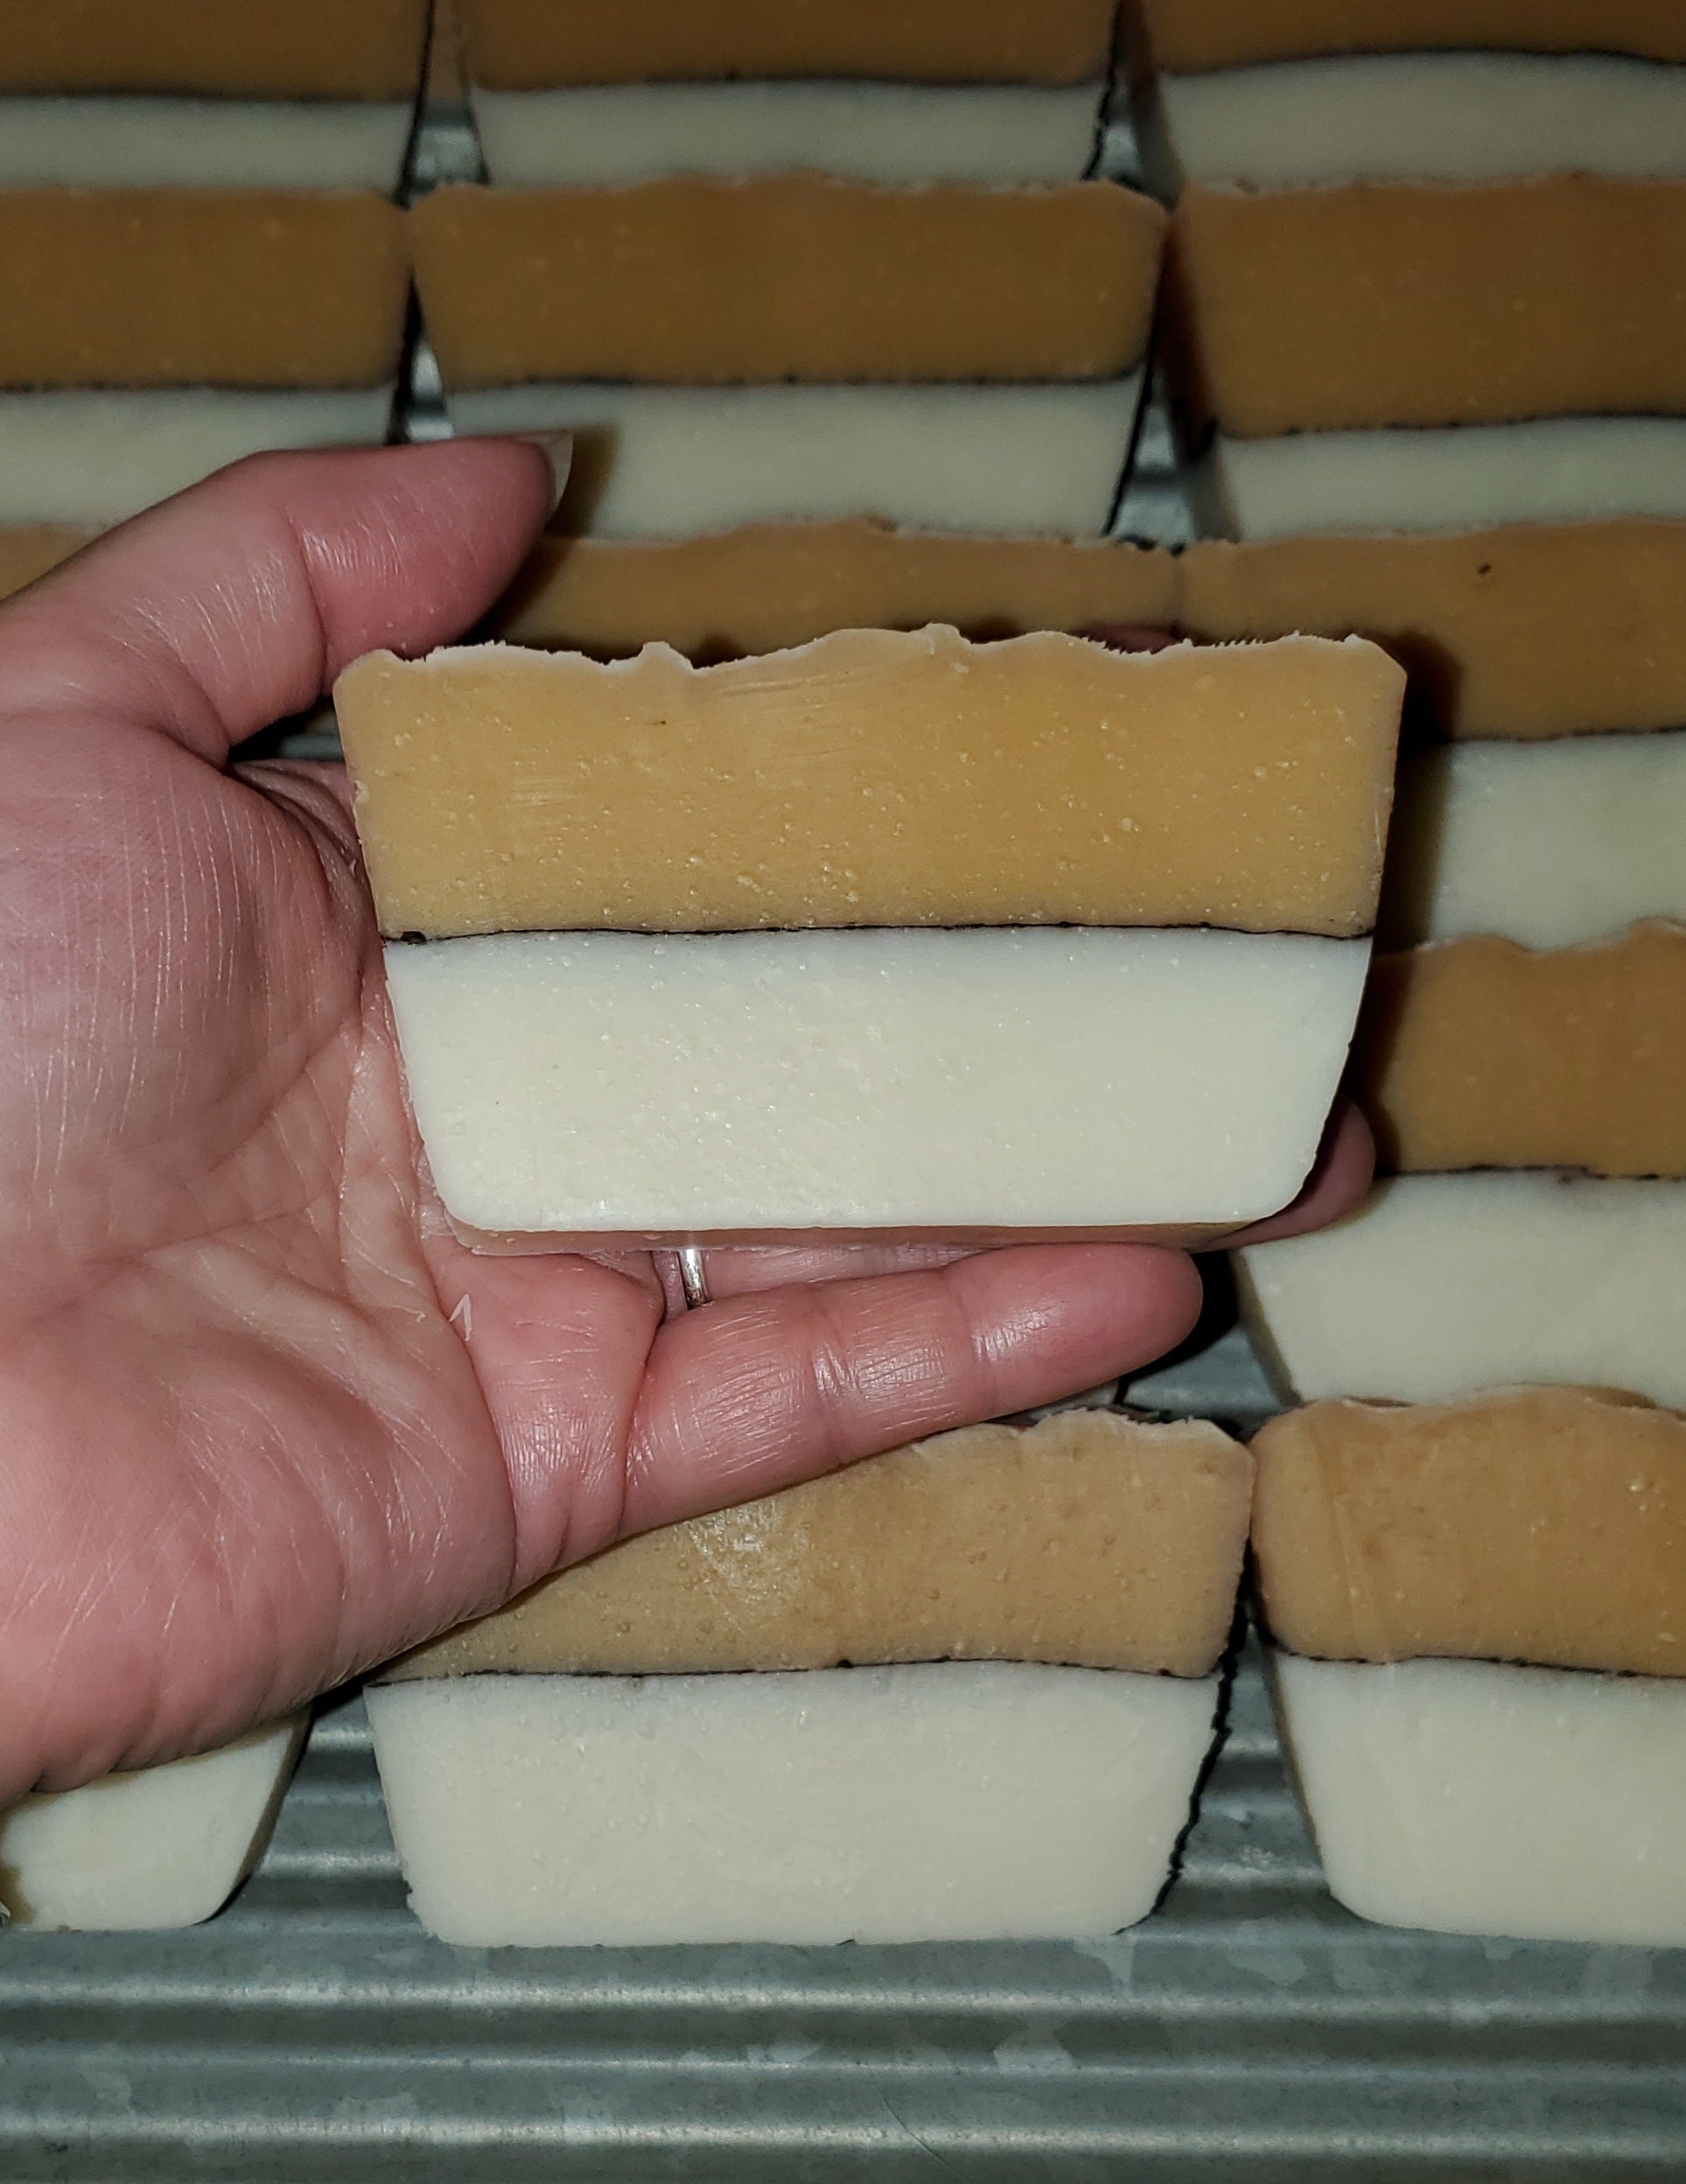 Butterific shea and honey two tone soap shown in a woman's hand with several bars on a washing board in the background.